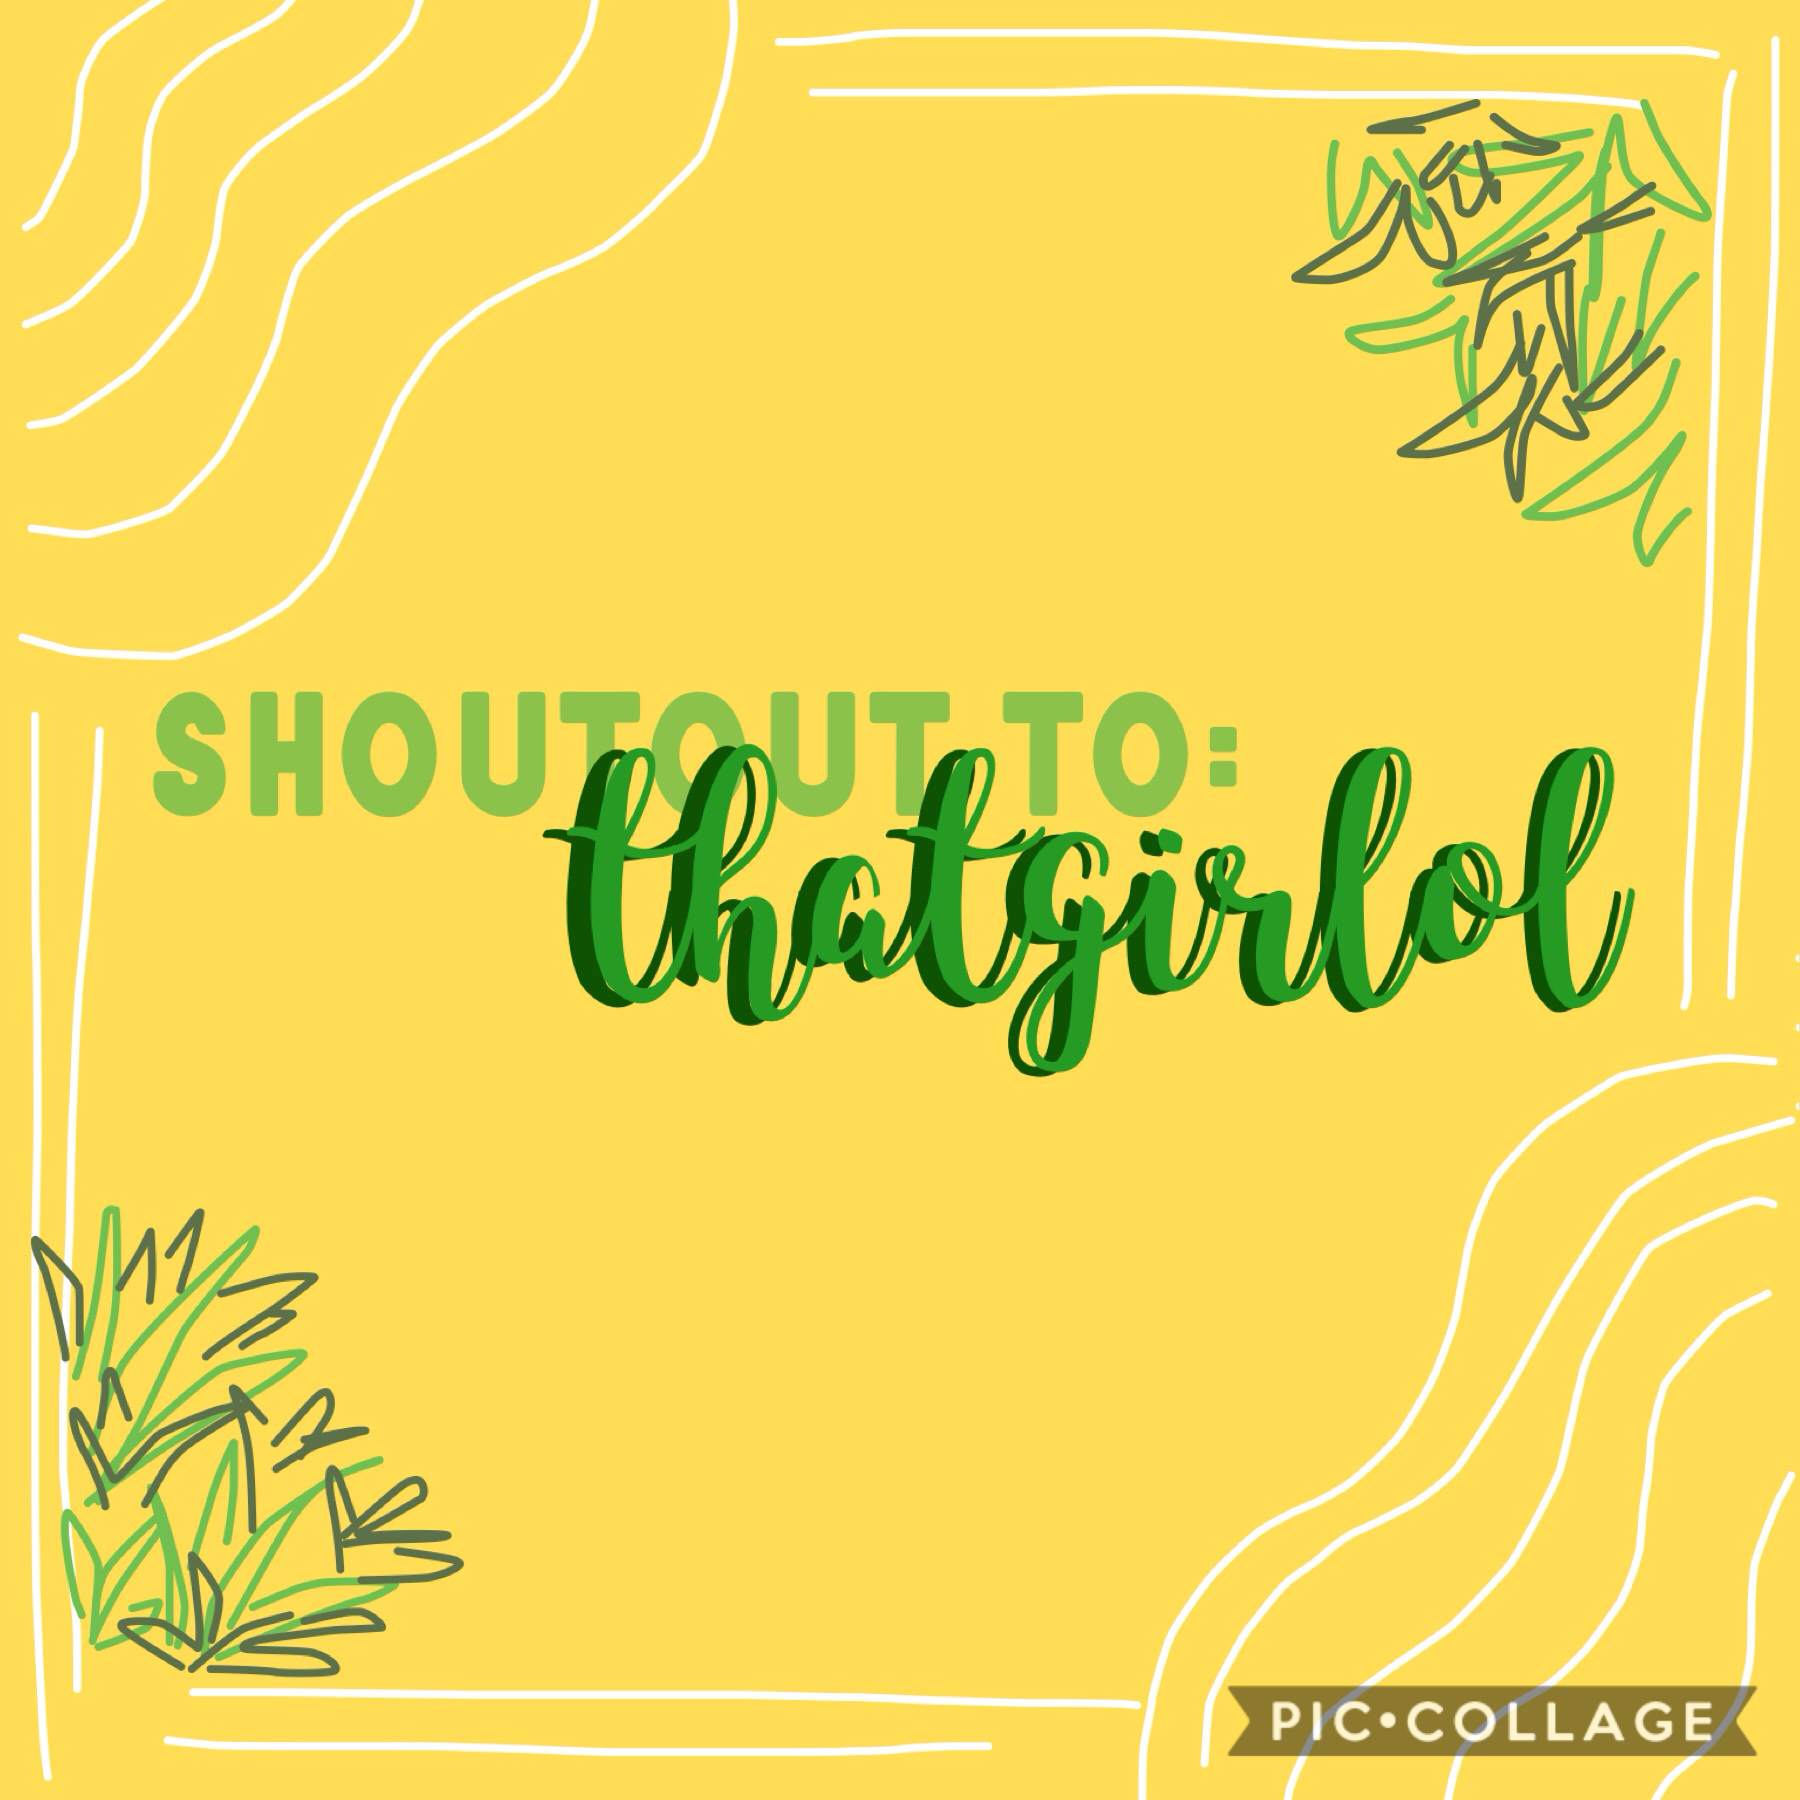 💕🌻 Shoutout to thatgirlol for the kindness challenge! 🌻💕